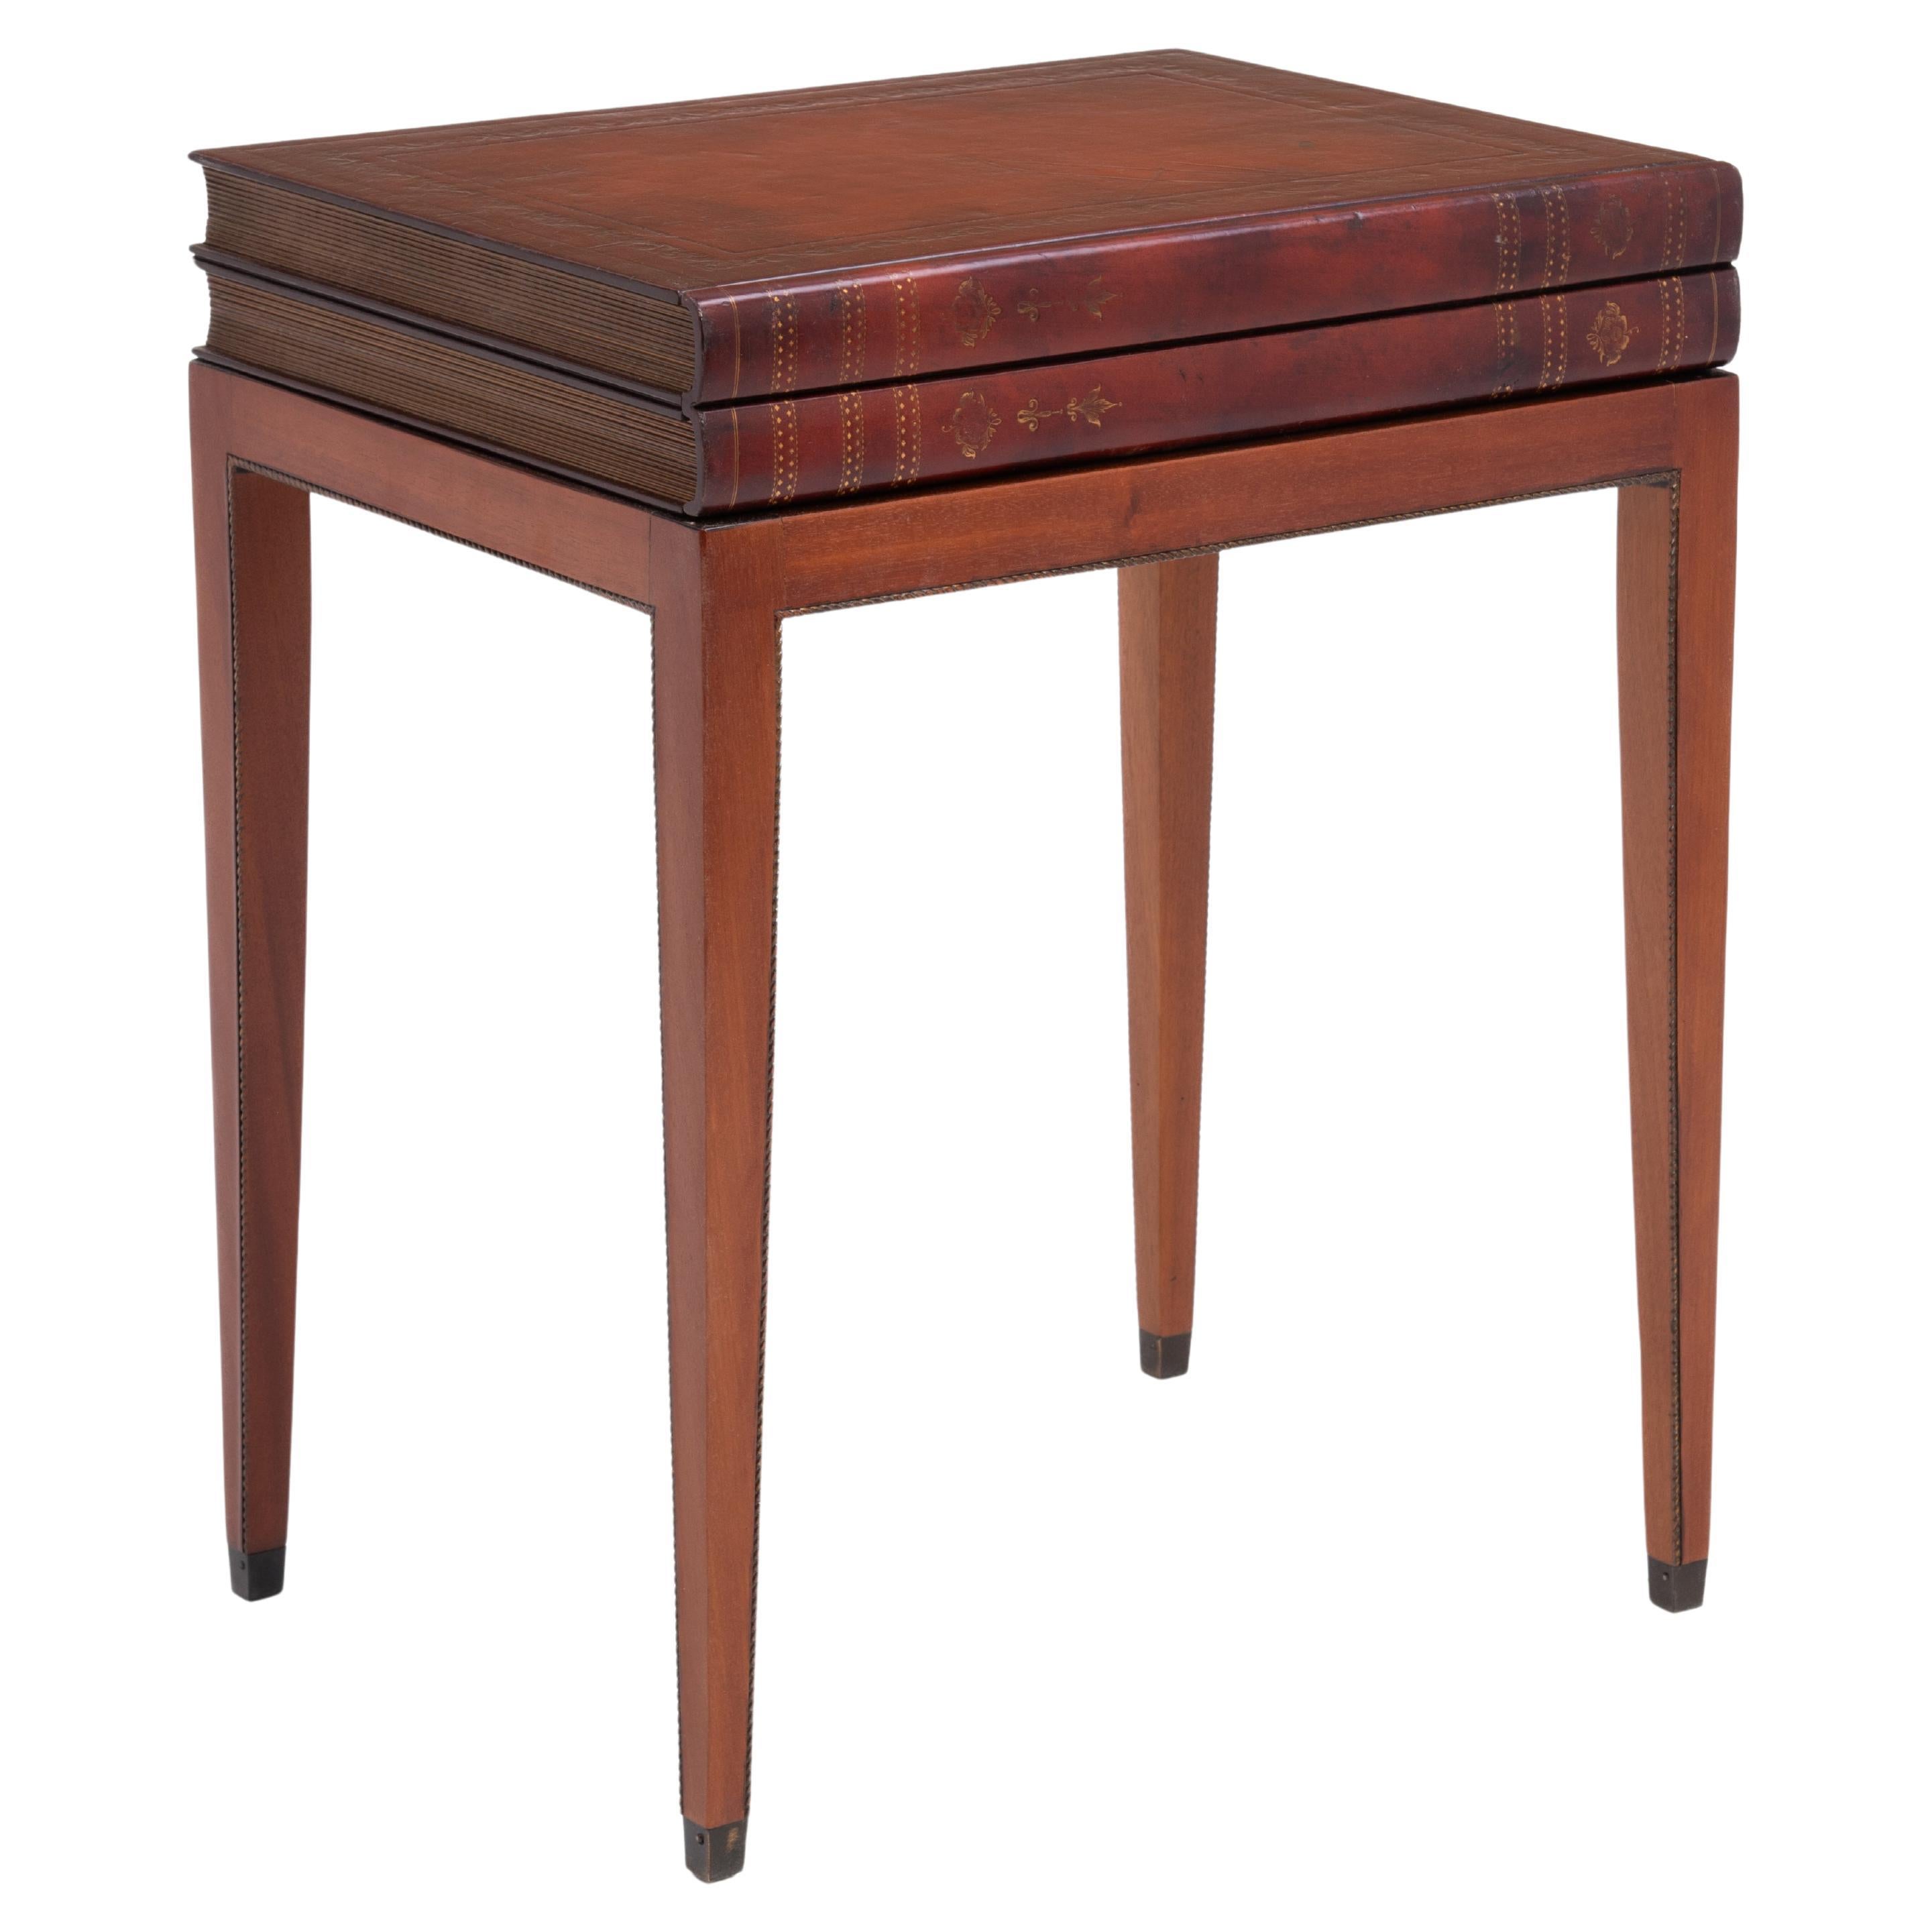 Trompe l'Oeil Faux Stacked Books Wood Leather Single Drawer Table Tapered Legs For Sale